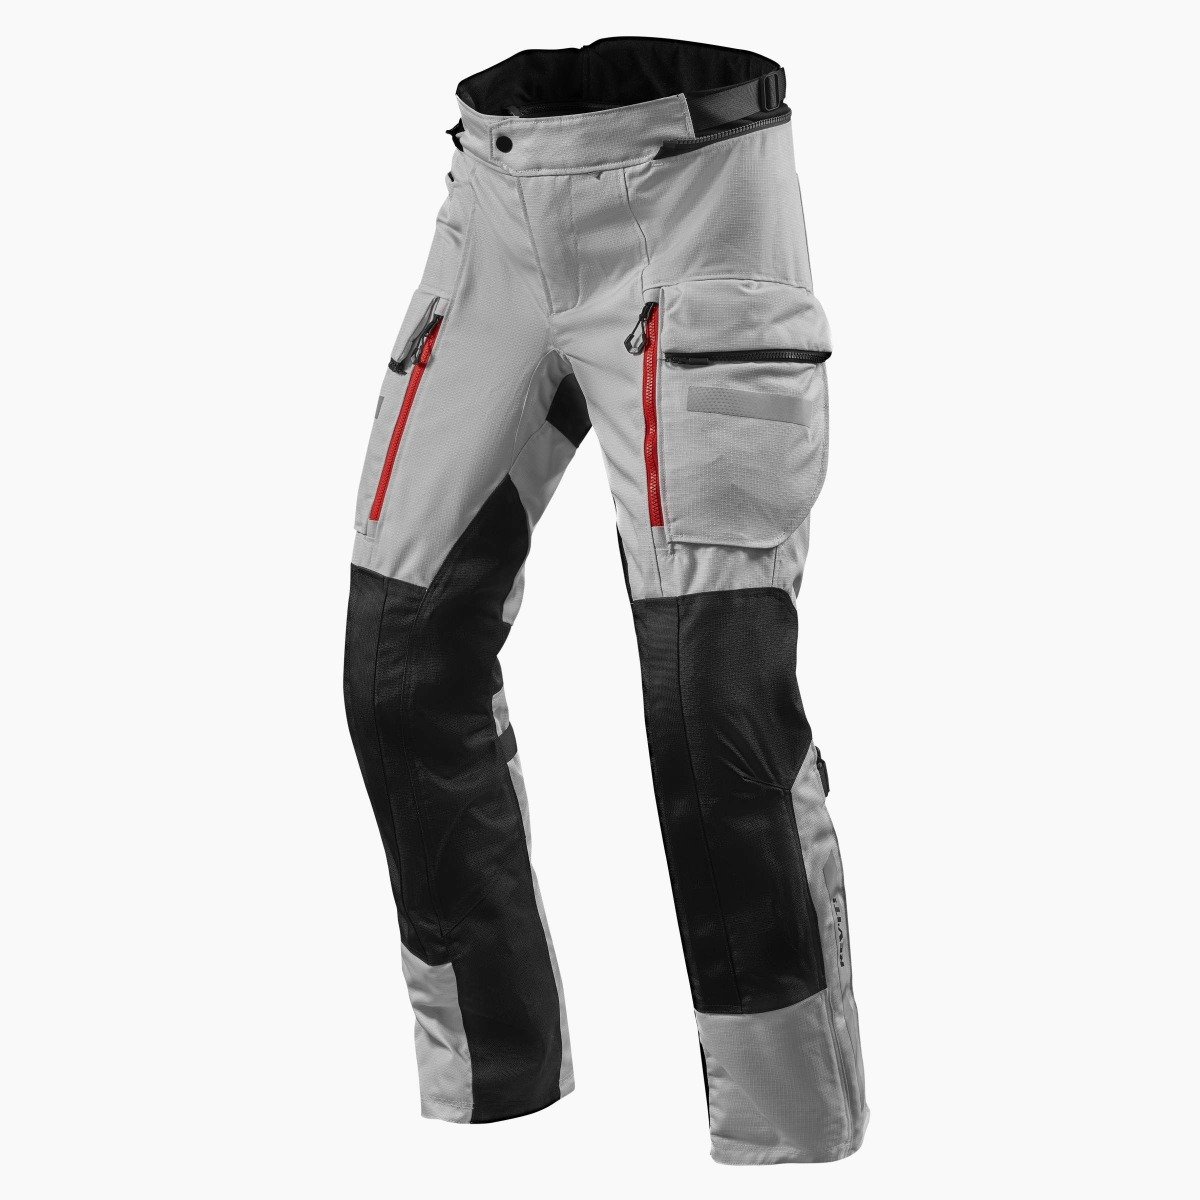 Image of REV'IT! Sand 4 H2O Long Silver Black Motorcycle Pants Size M ID 8700001316545